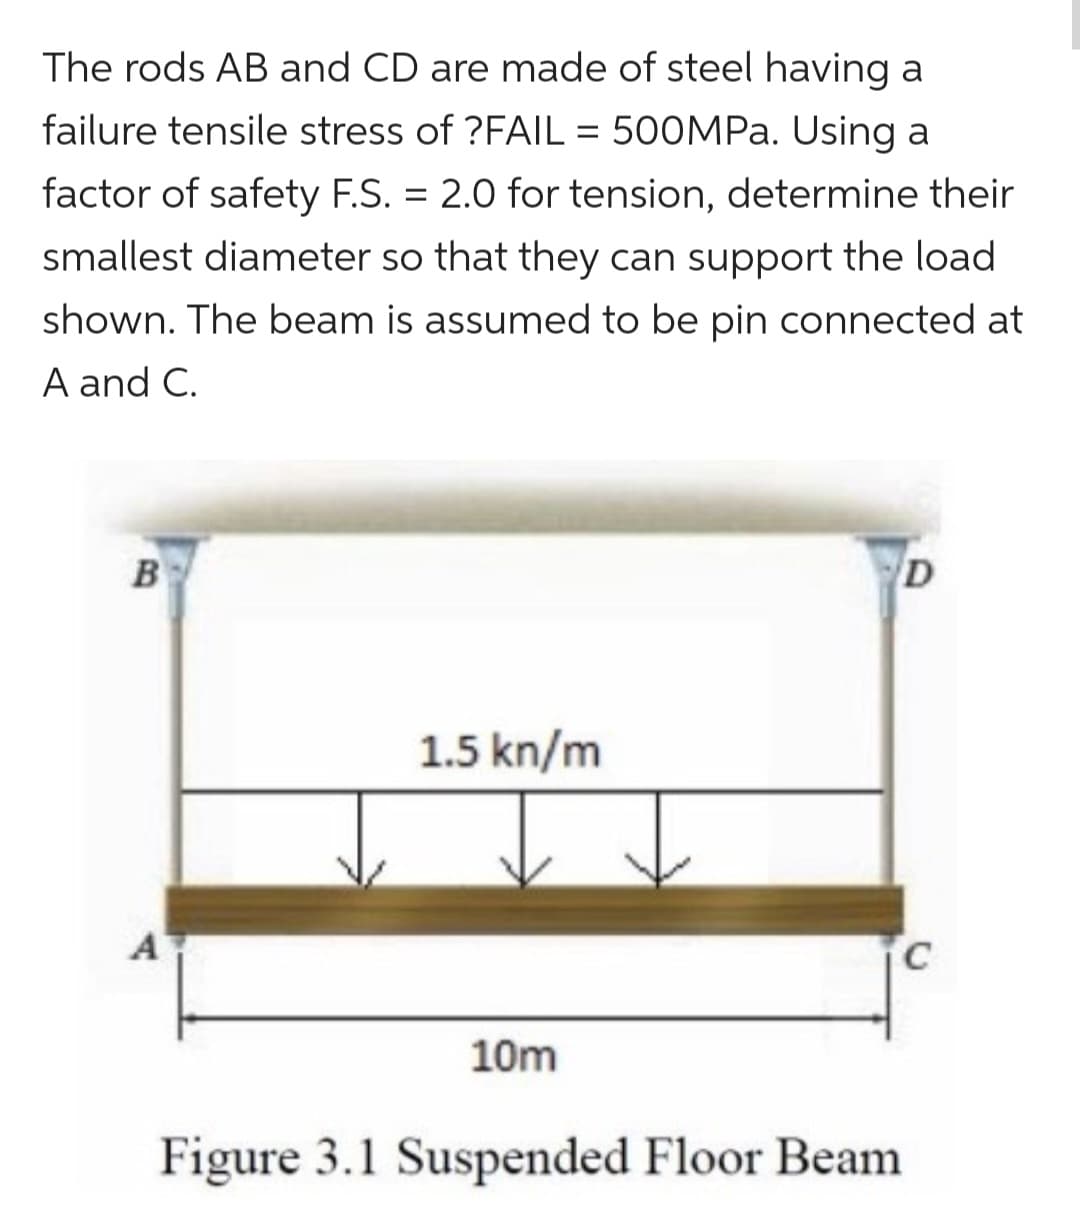 The rods AB and CD are made of steel having a
failure tensile stress of ?FAIL = 500MPa. Using a
factor of safety F.S. = 2.0 for tension, determine their
smallest diameter so that they can support the load
shown. The beam is assumed to be pin connected at
A and C.
B
A
1.5 kn/m
10m
Figure 3.1 Suspended Floor Beam
D
C